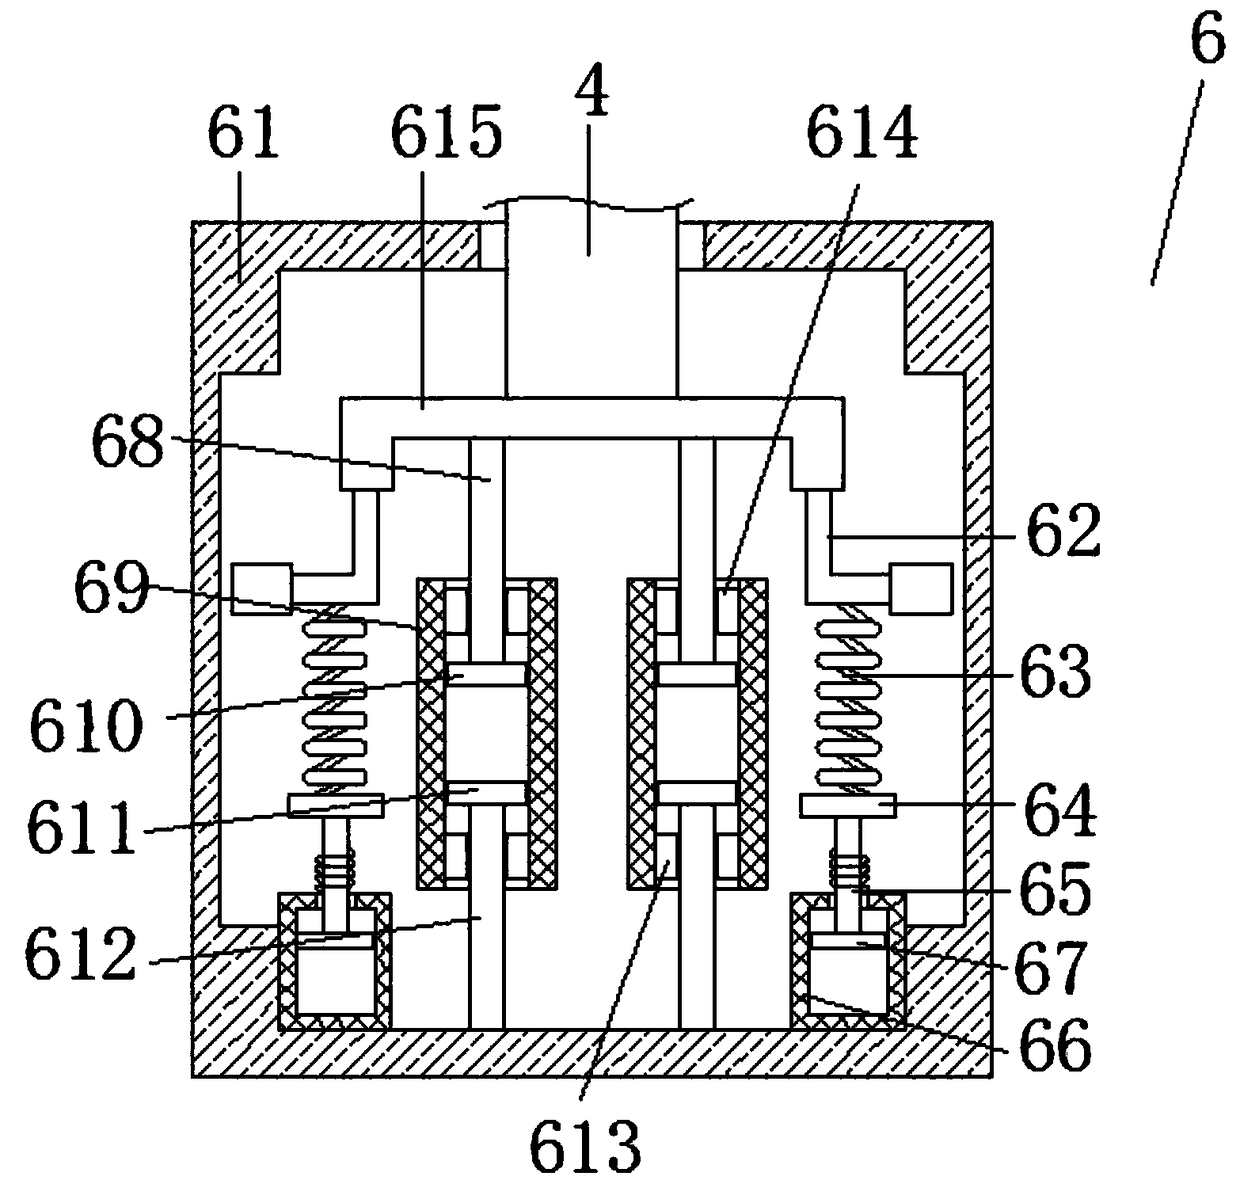 Mounting base for electromechanical engineering equipment and with efficient buffer function